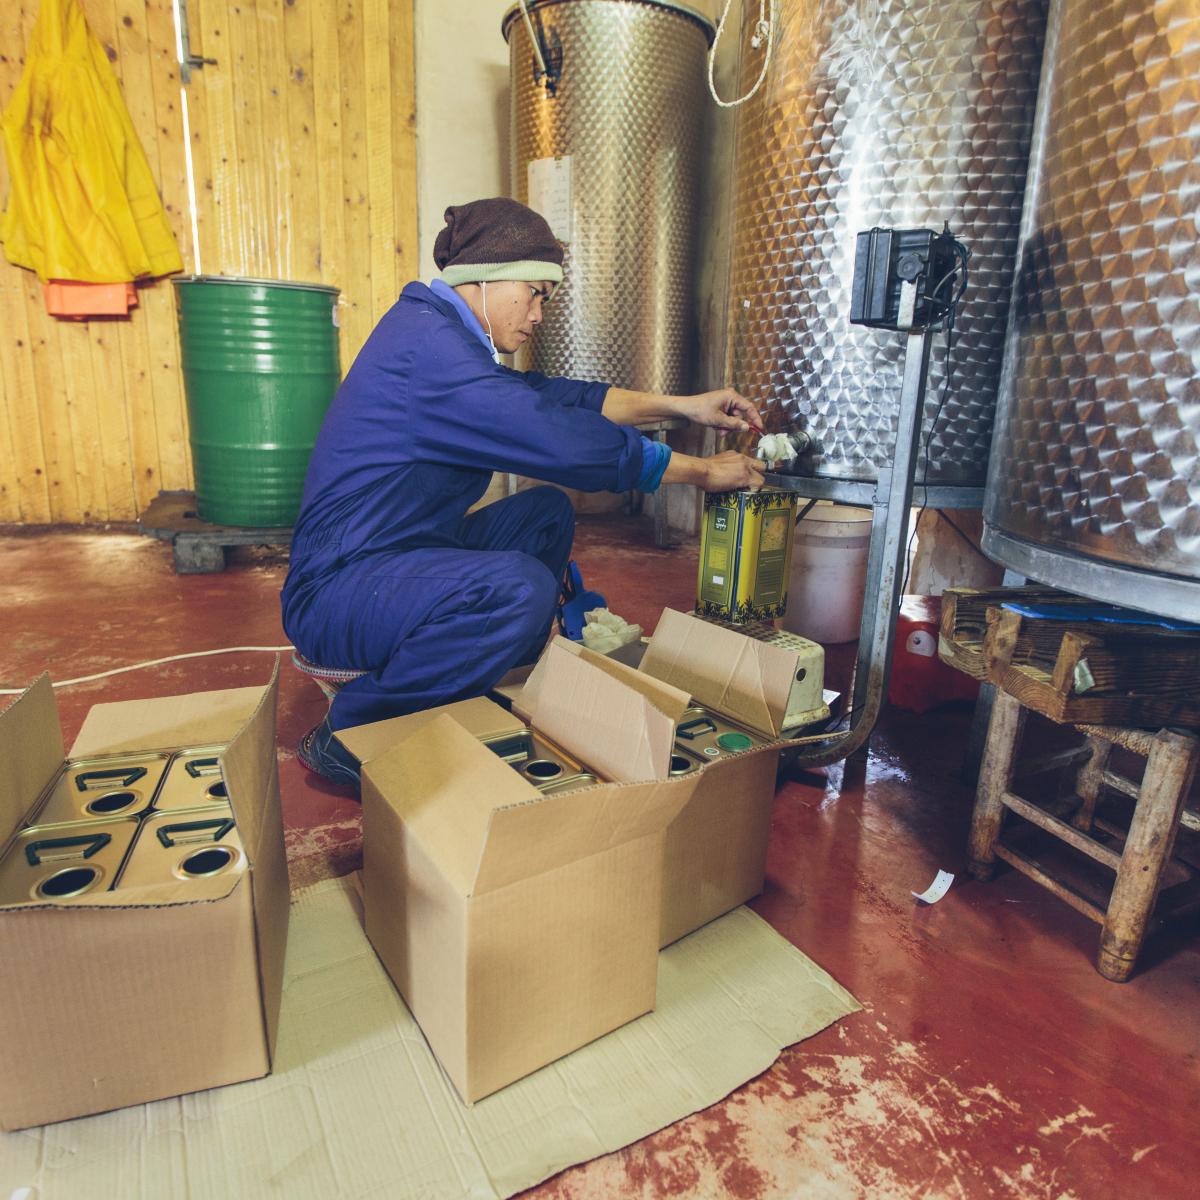 A worker fills containers with olive oil.